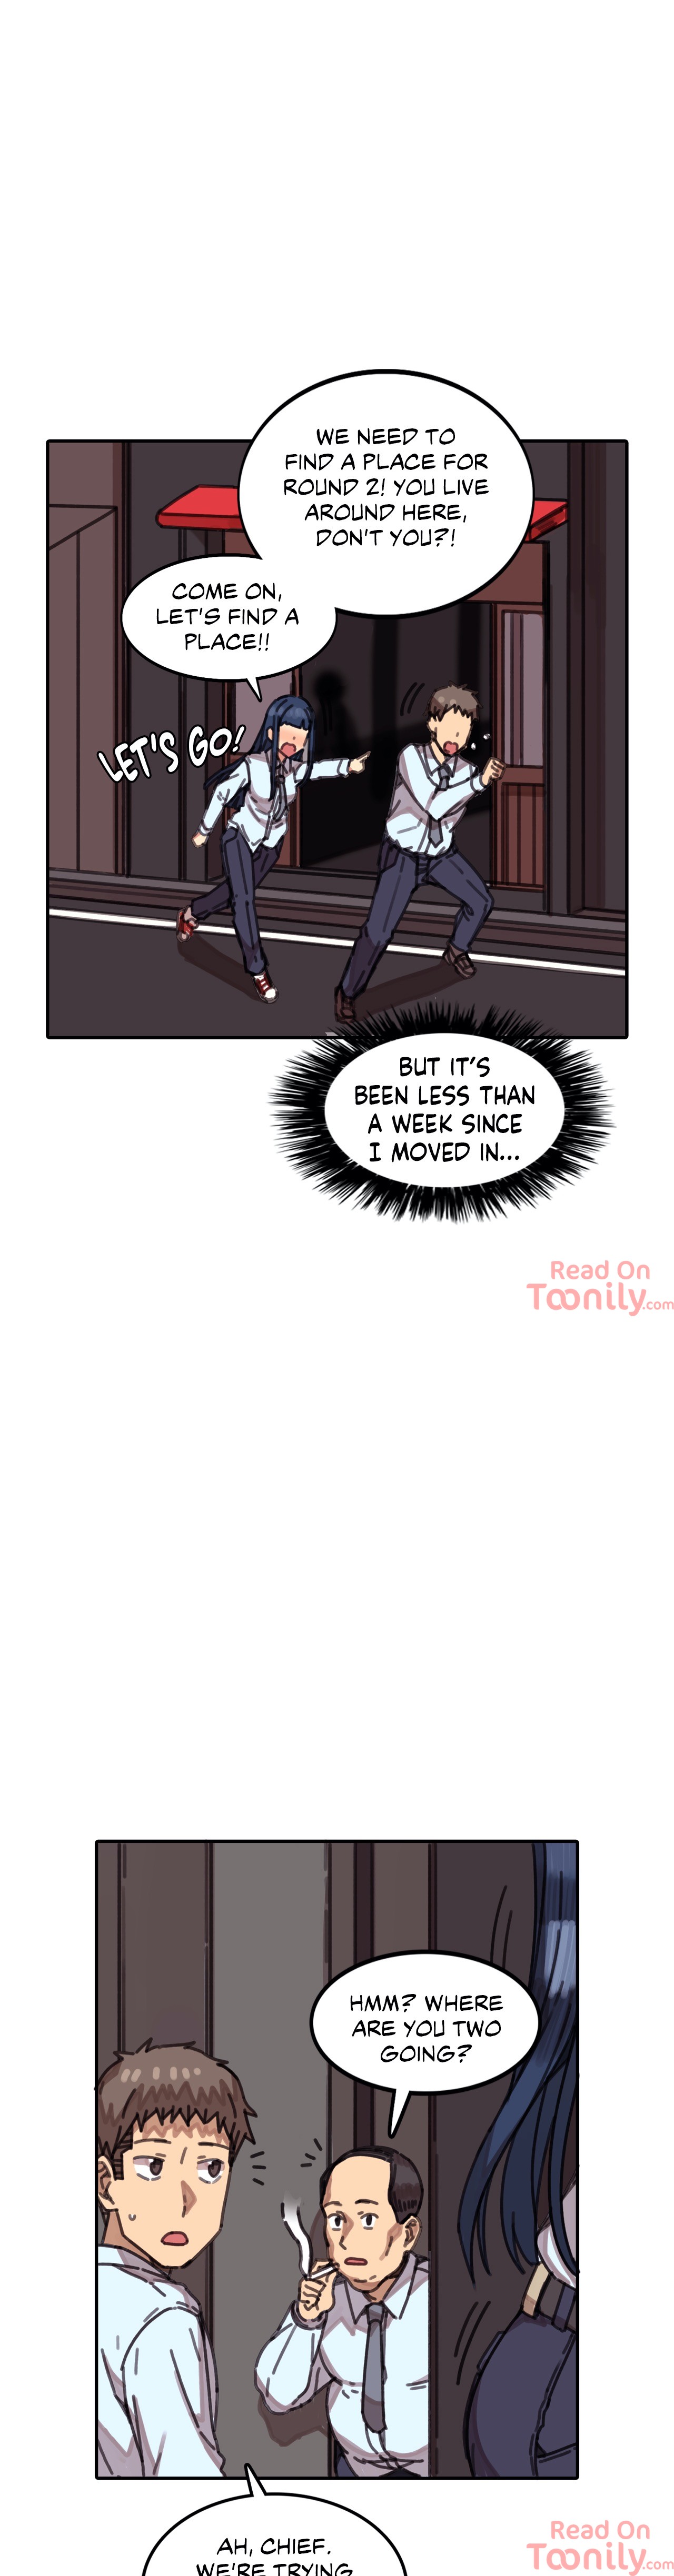 The Girl That Lingers in the Wall - Chapter 6 Page 26